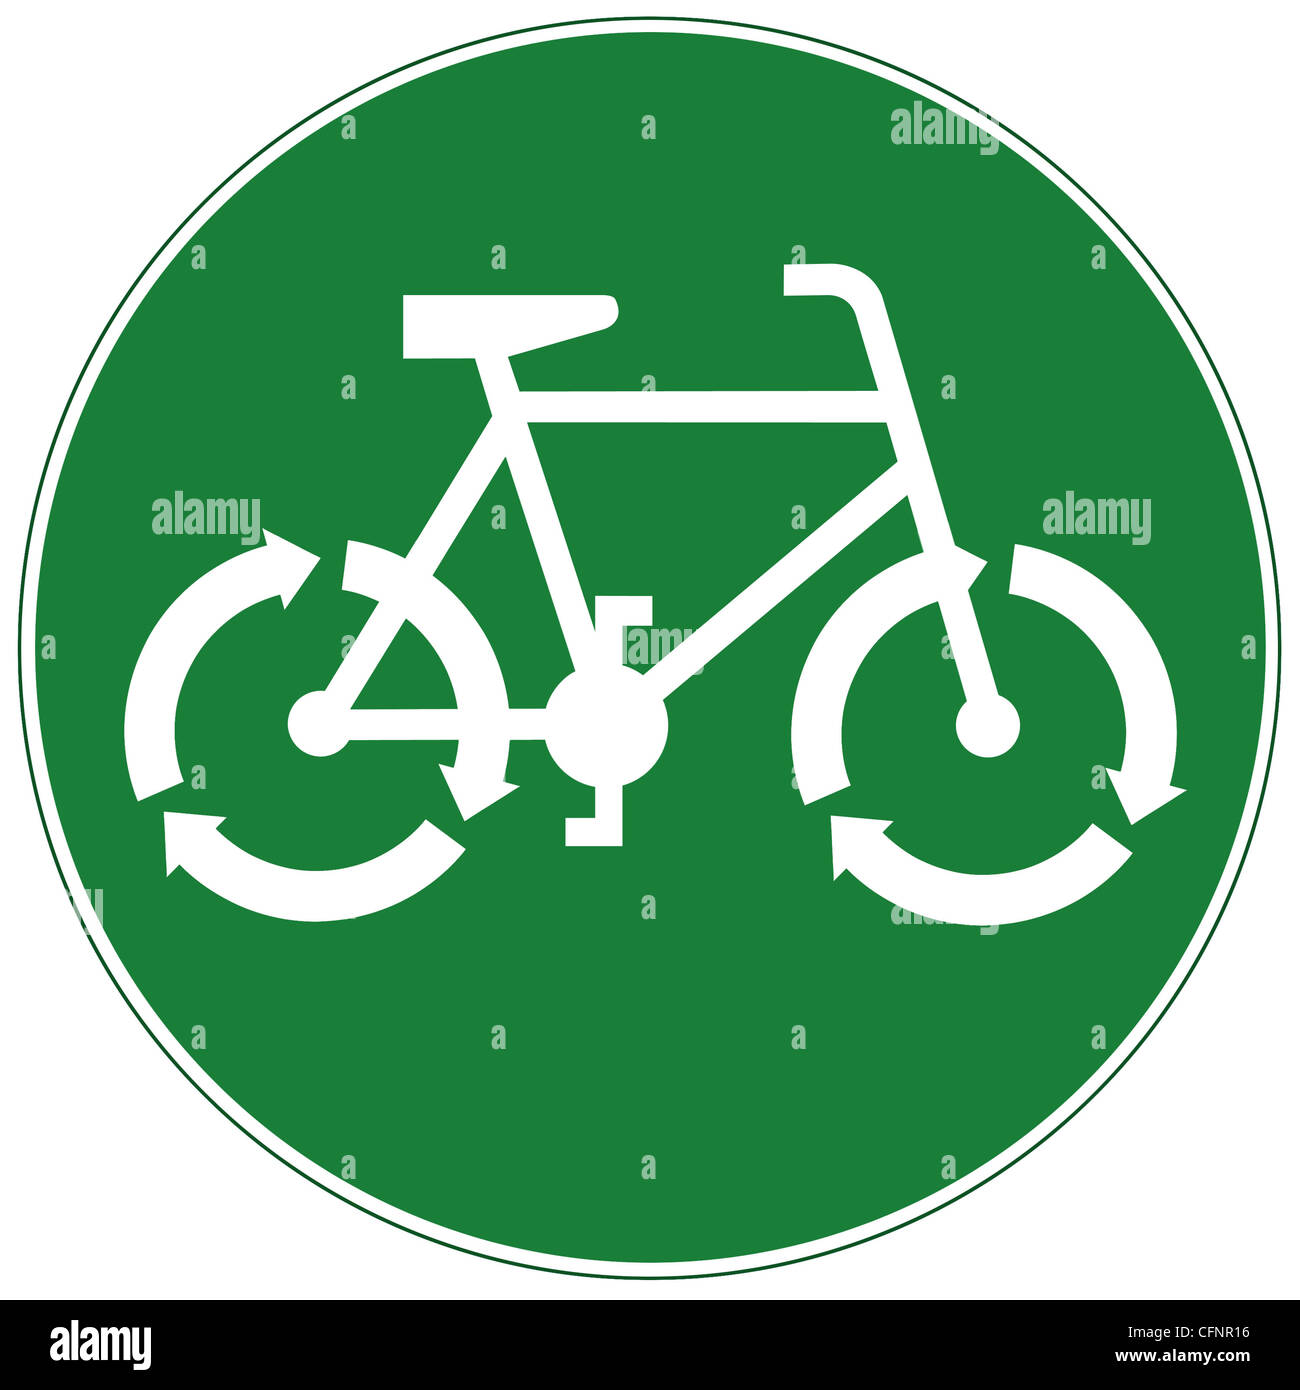 Green road sign with white bicycle pictograph with three-arrow recycle symbol as wheels - recycle concept Stock Photo